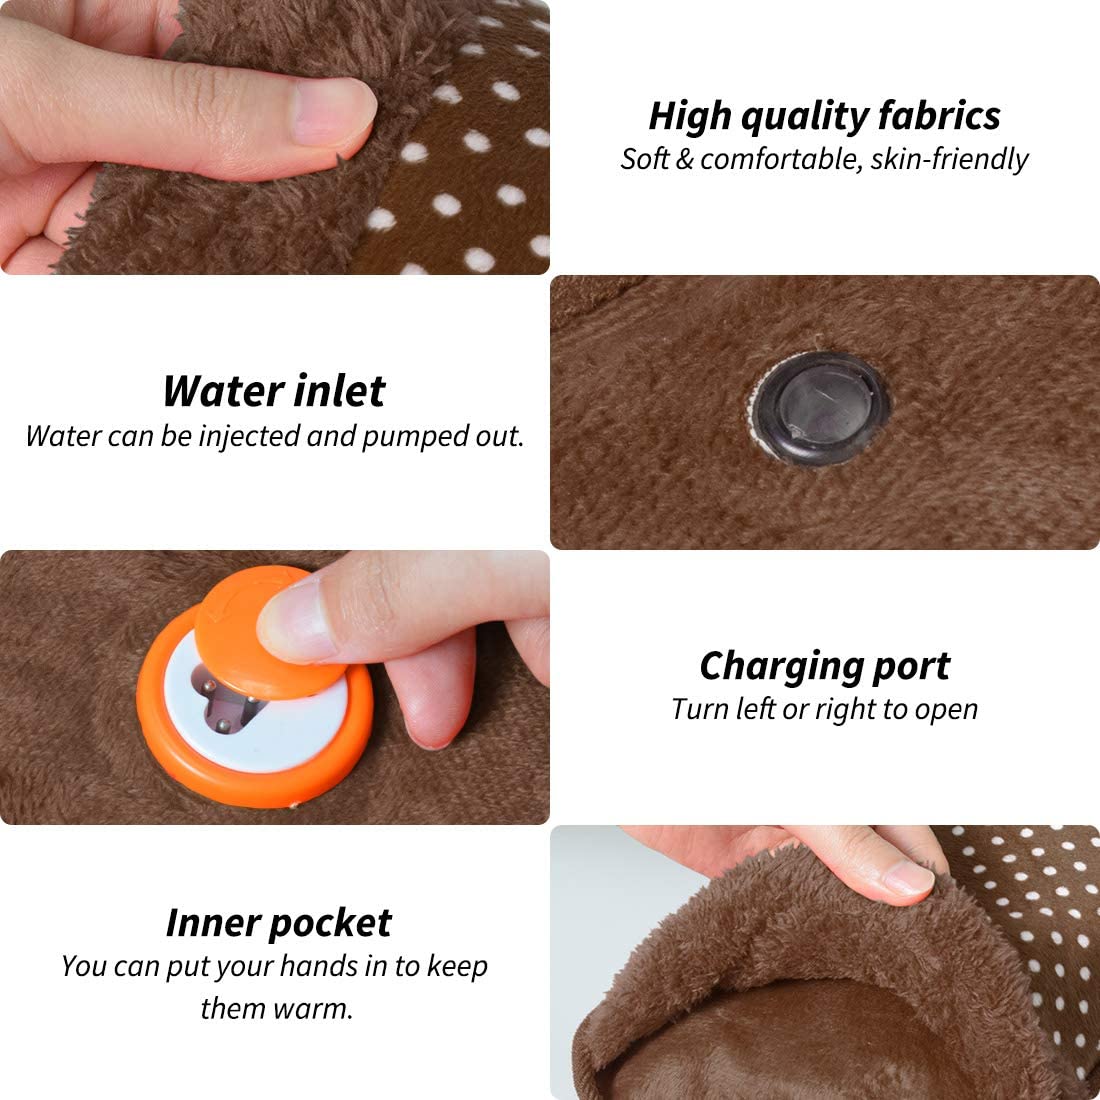 Rechargeable Electric Hot Water Bottle: Portable Heating Pad with Soft Fleece Cover